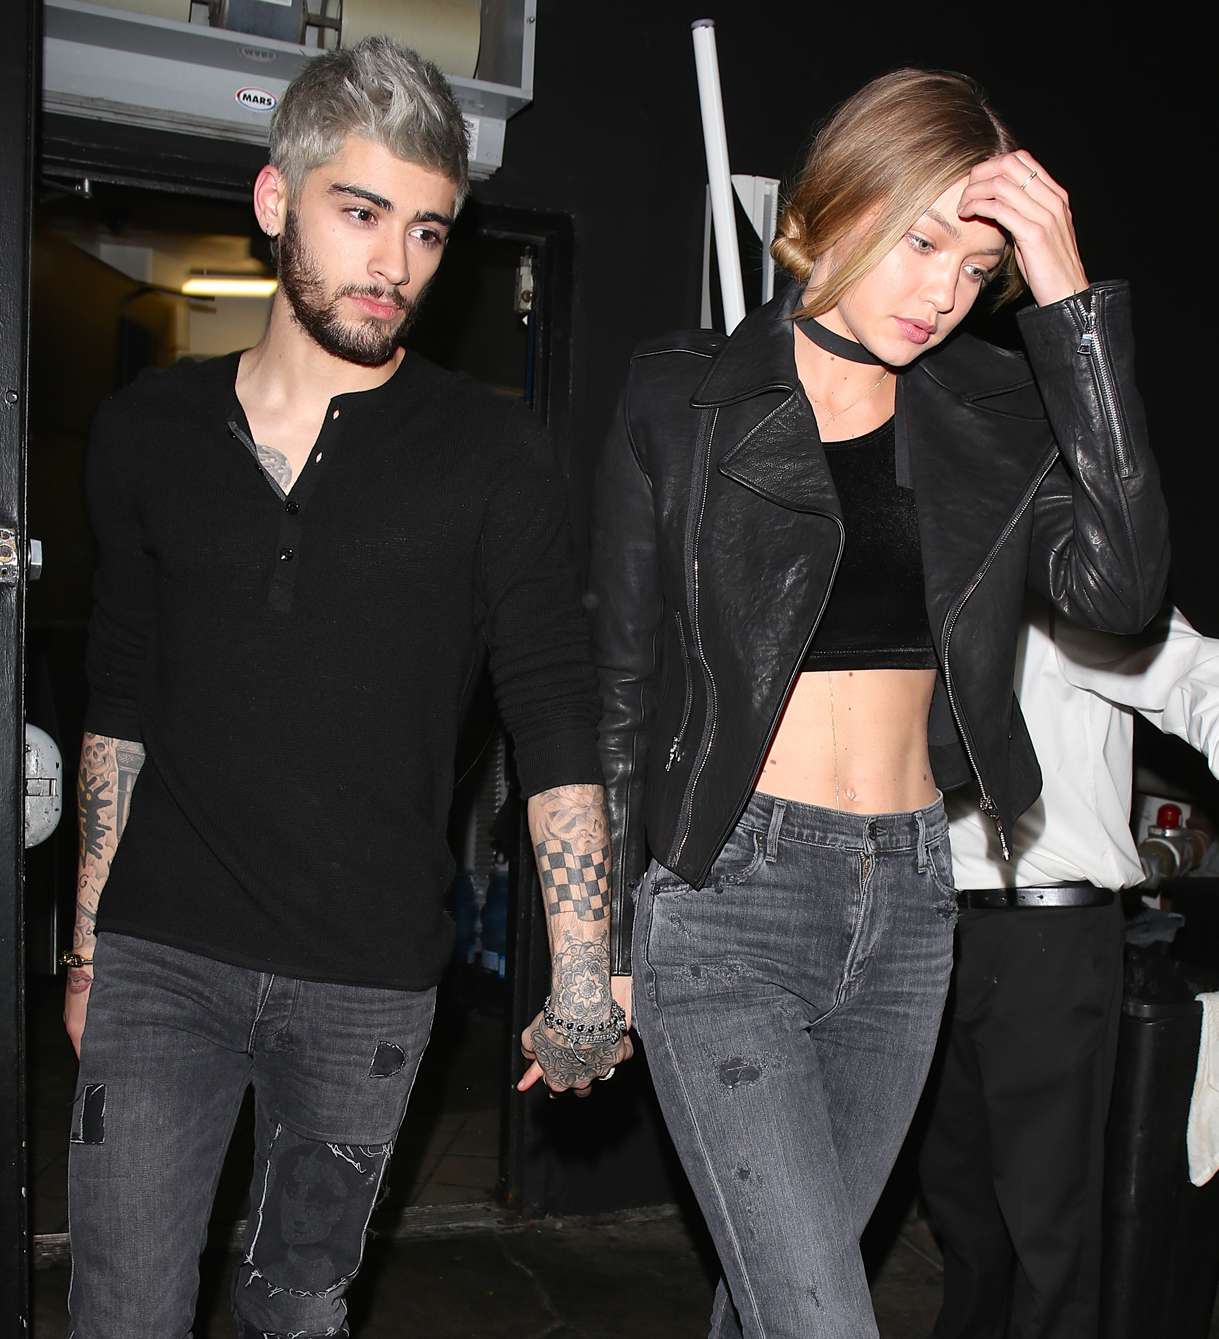 Swift, Hadid Coordinate for Night Out: Discover the Outfits and Venues They Chose! 15